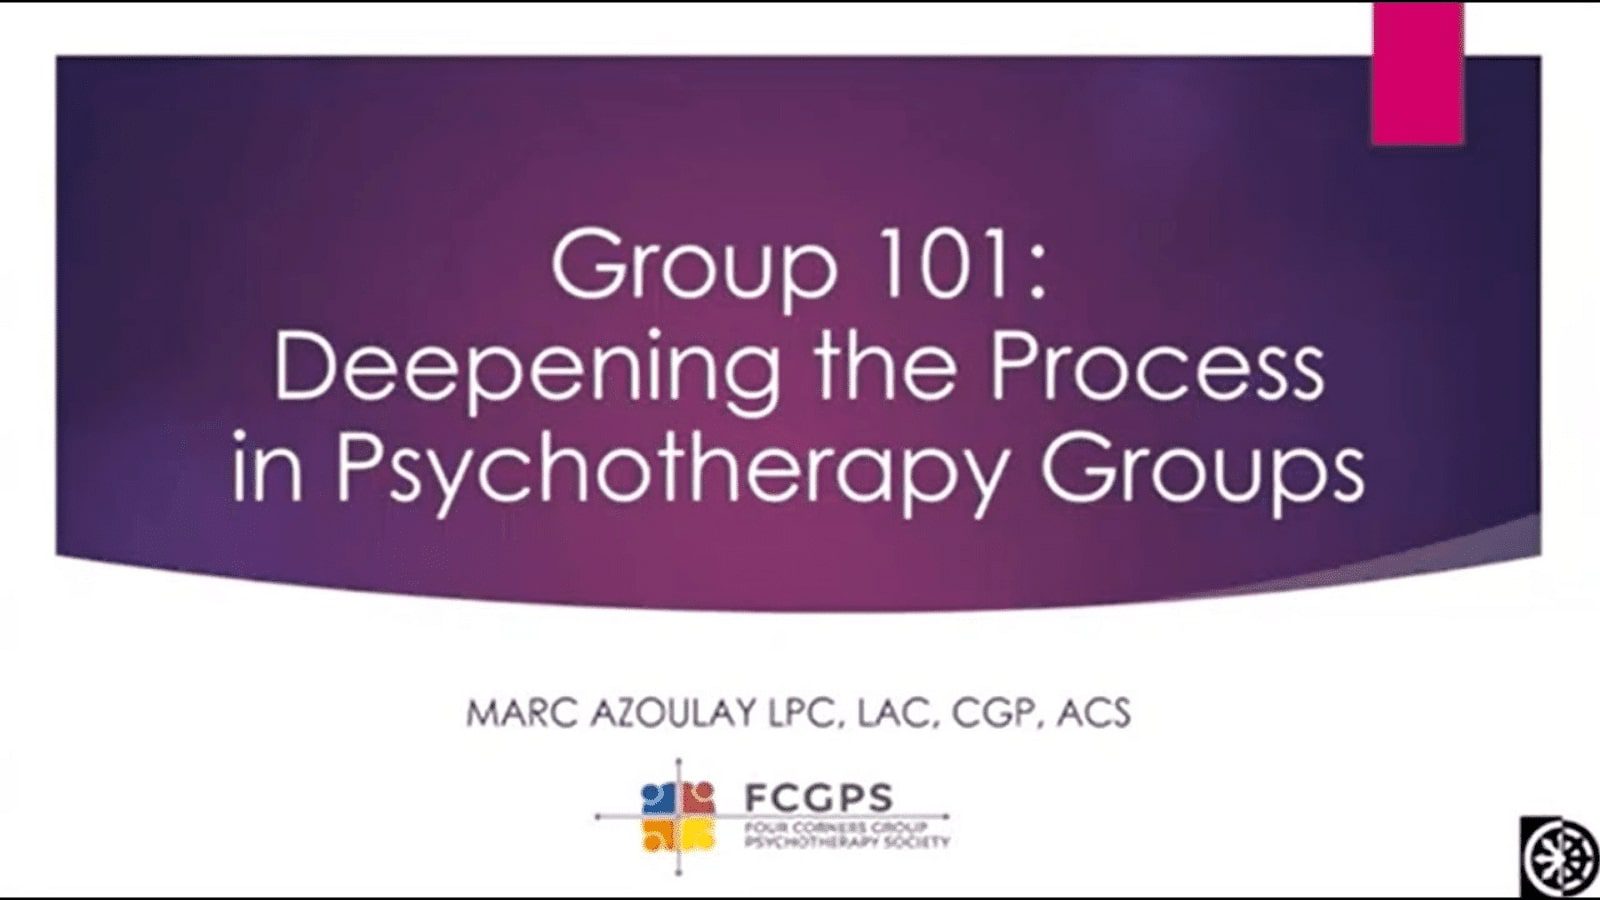 Deepening the process in psychotherapy groups seminar thumbnail